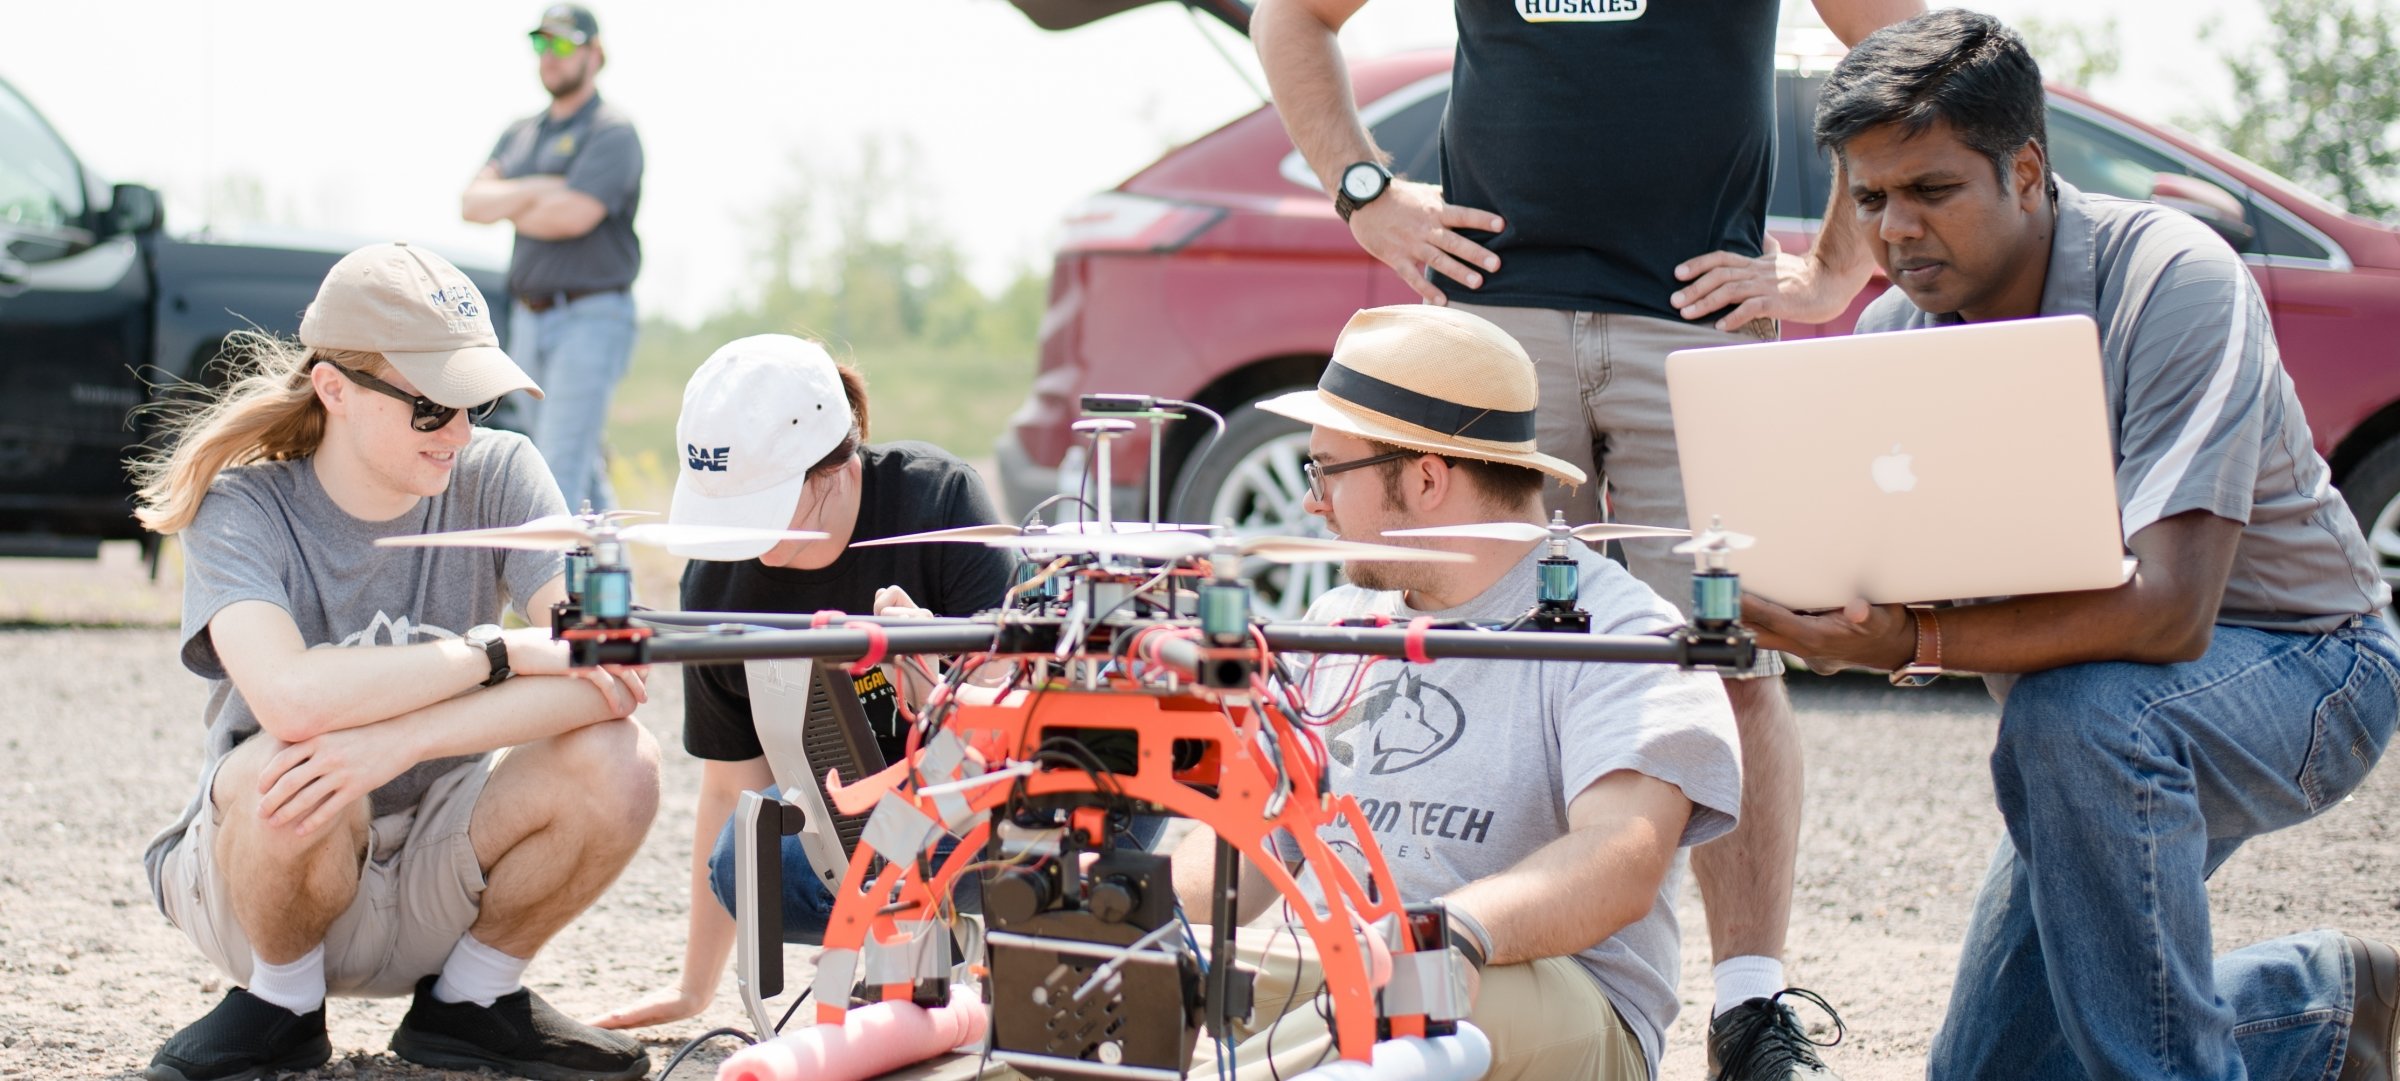 Four students outside looking at a drone in the foreground with another student behind them, hands on hips, and a man in the background near a car and truck with his arms folded.